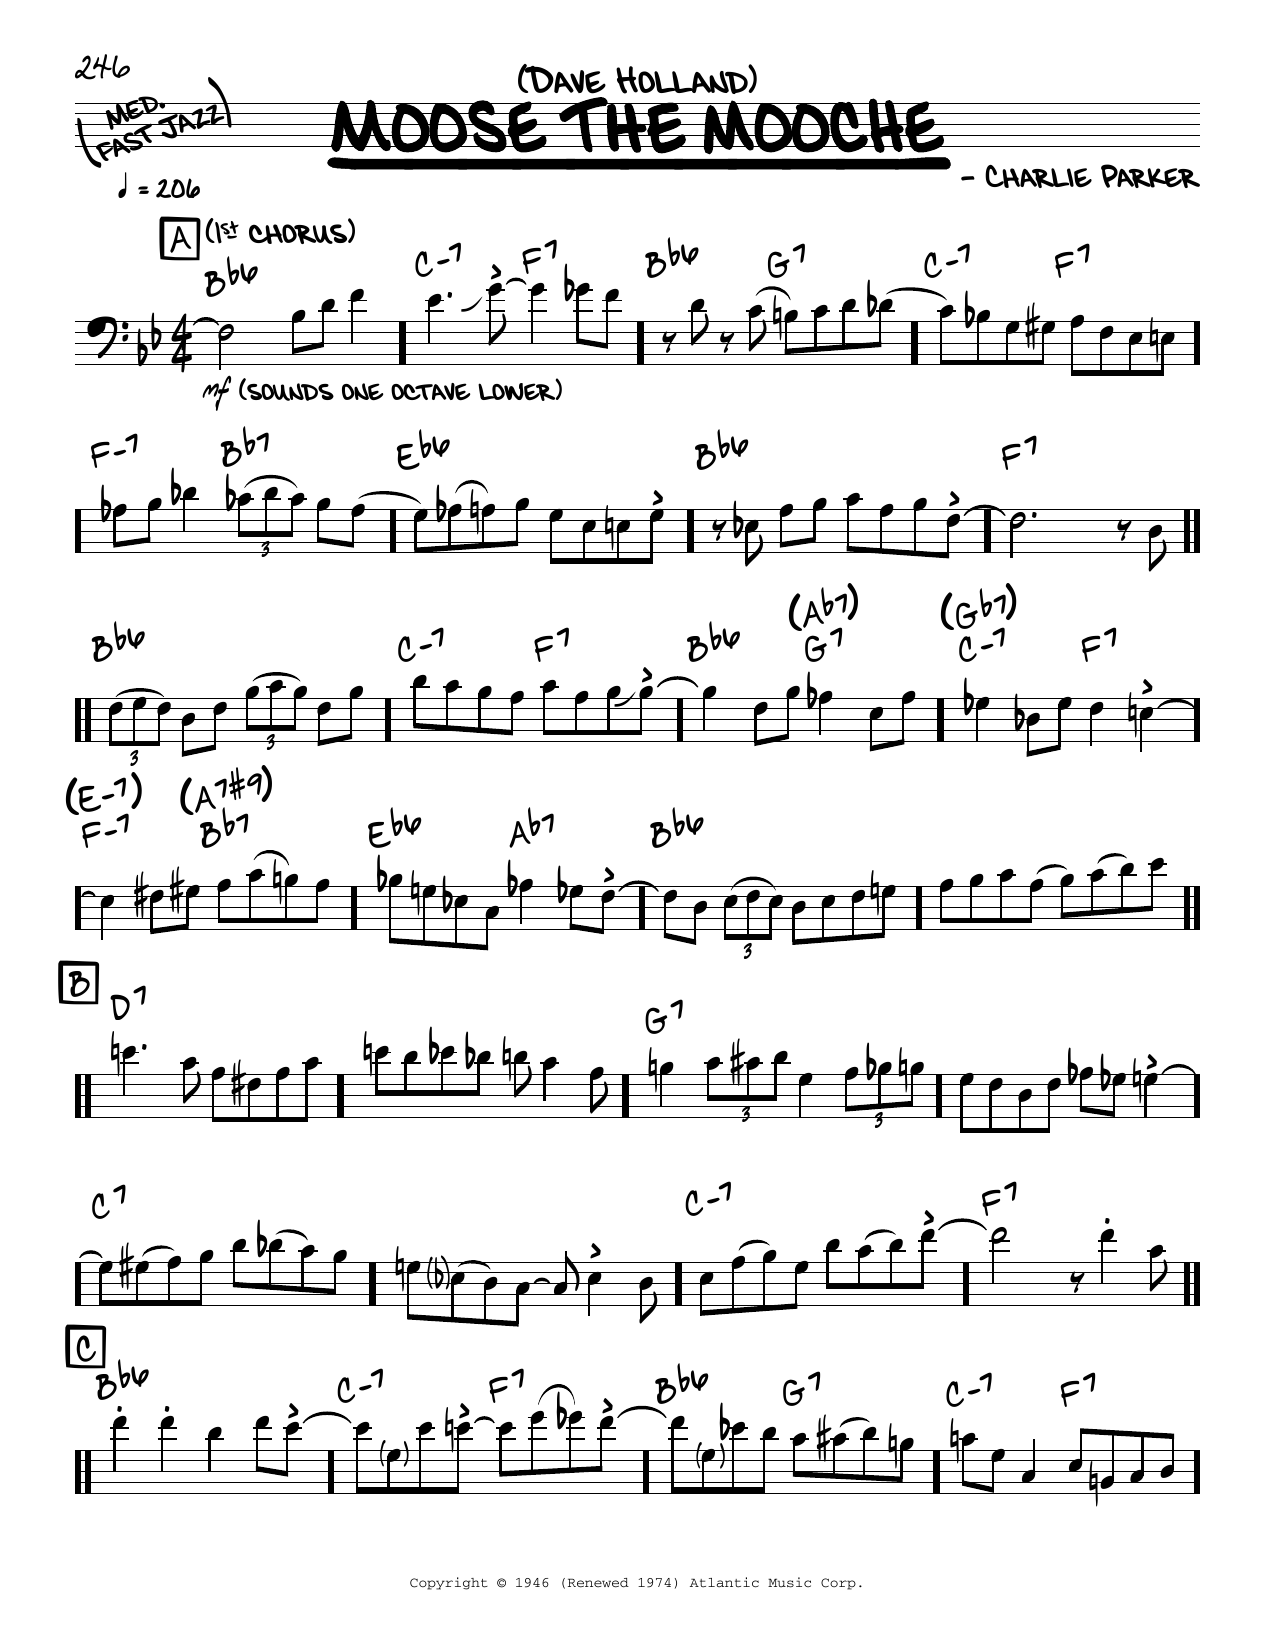 Download Dave Holland Moose The Mooche (solo only) Sheet Music